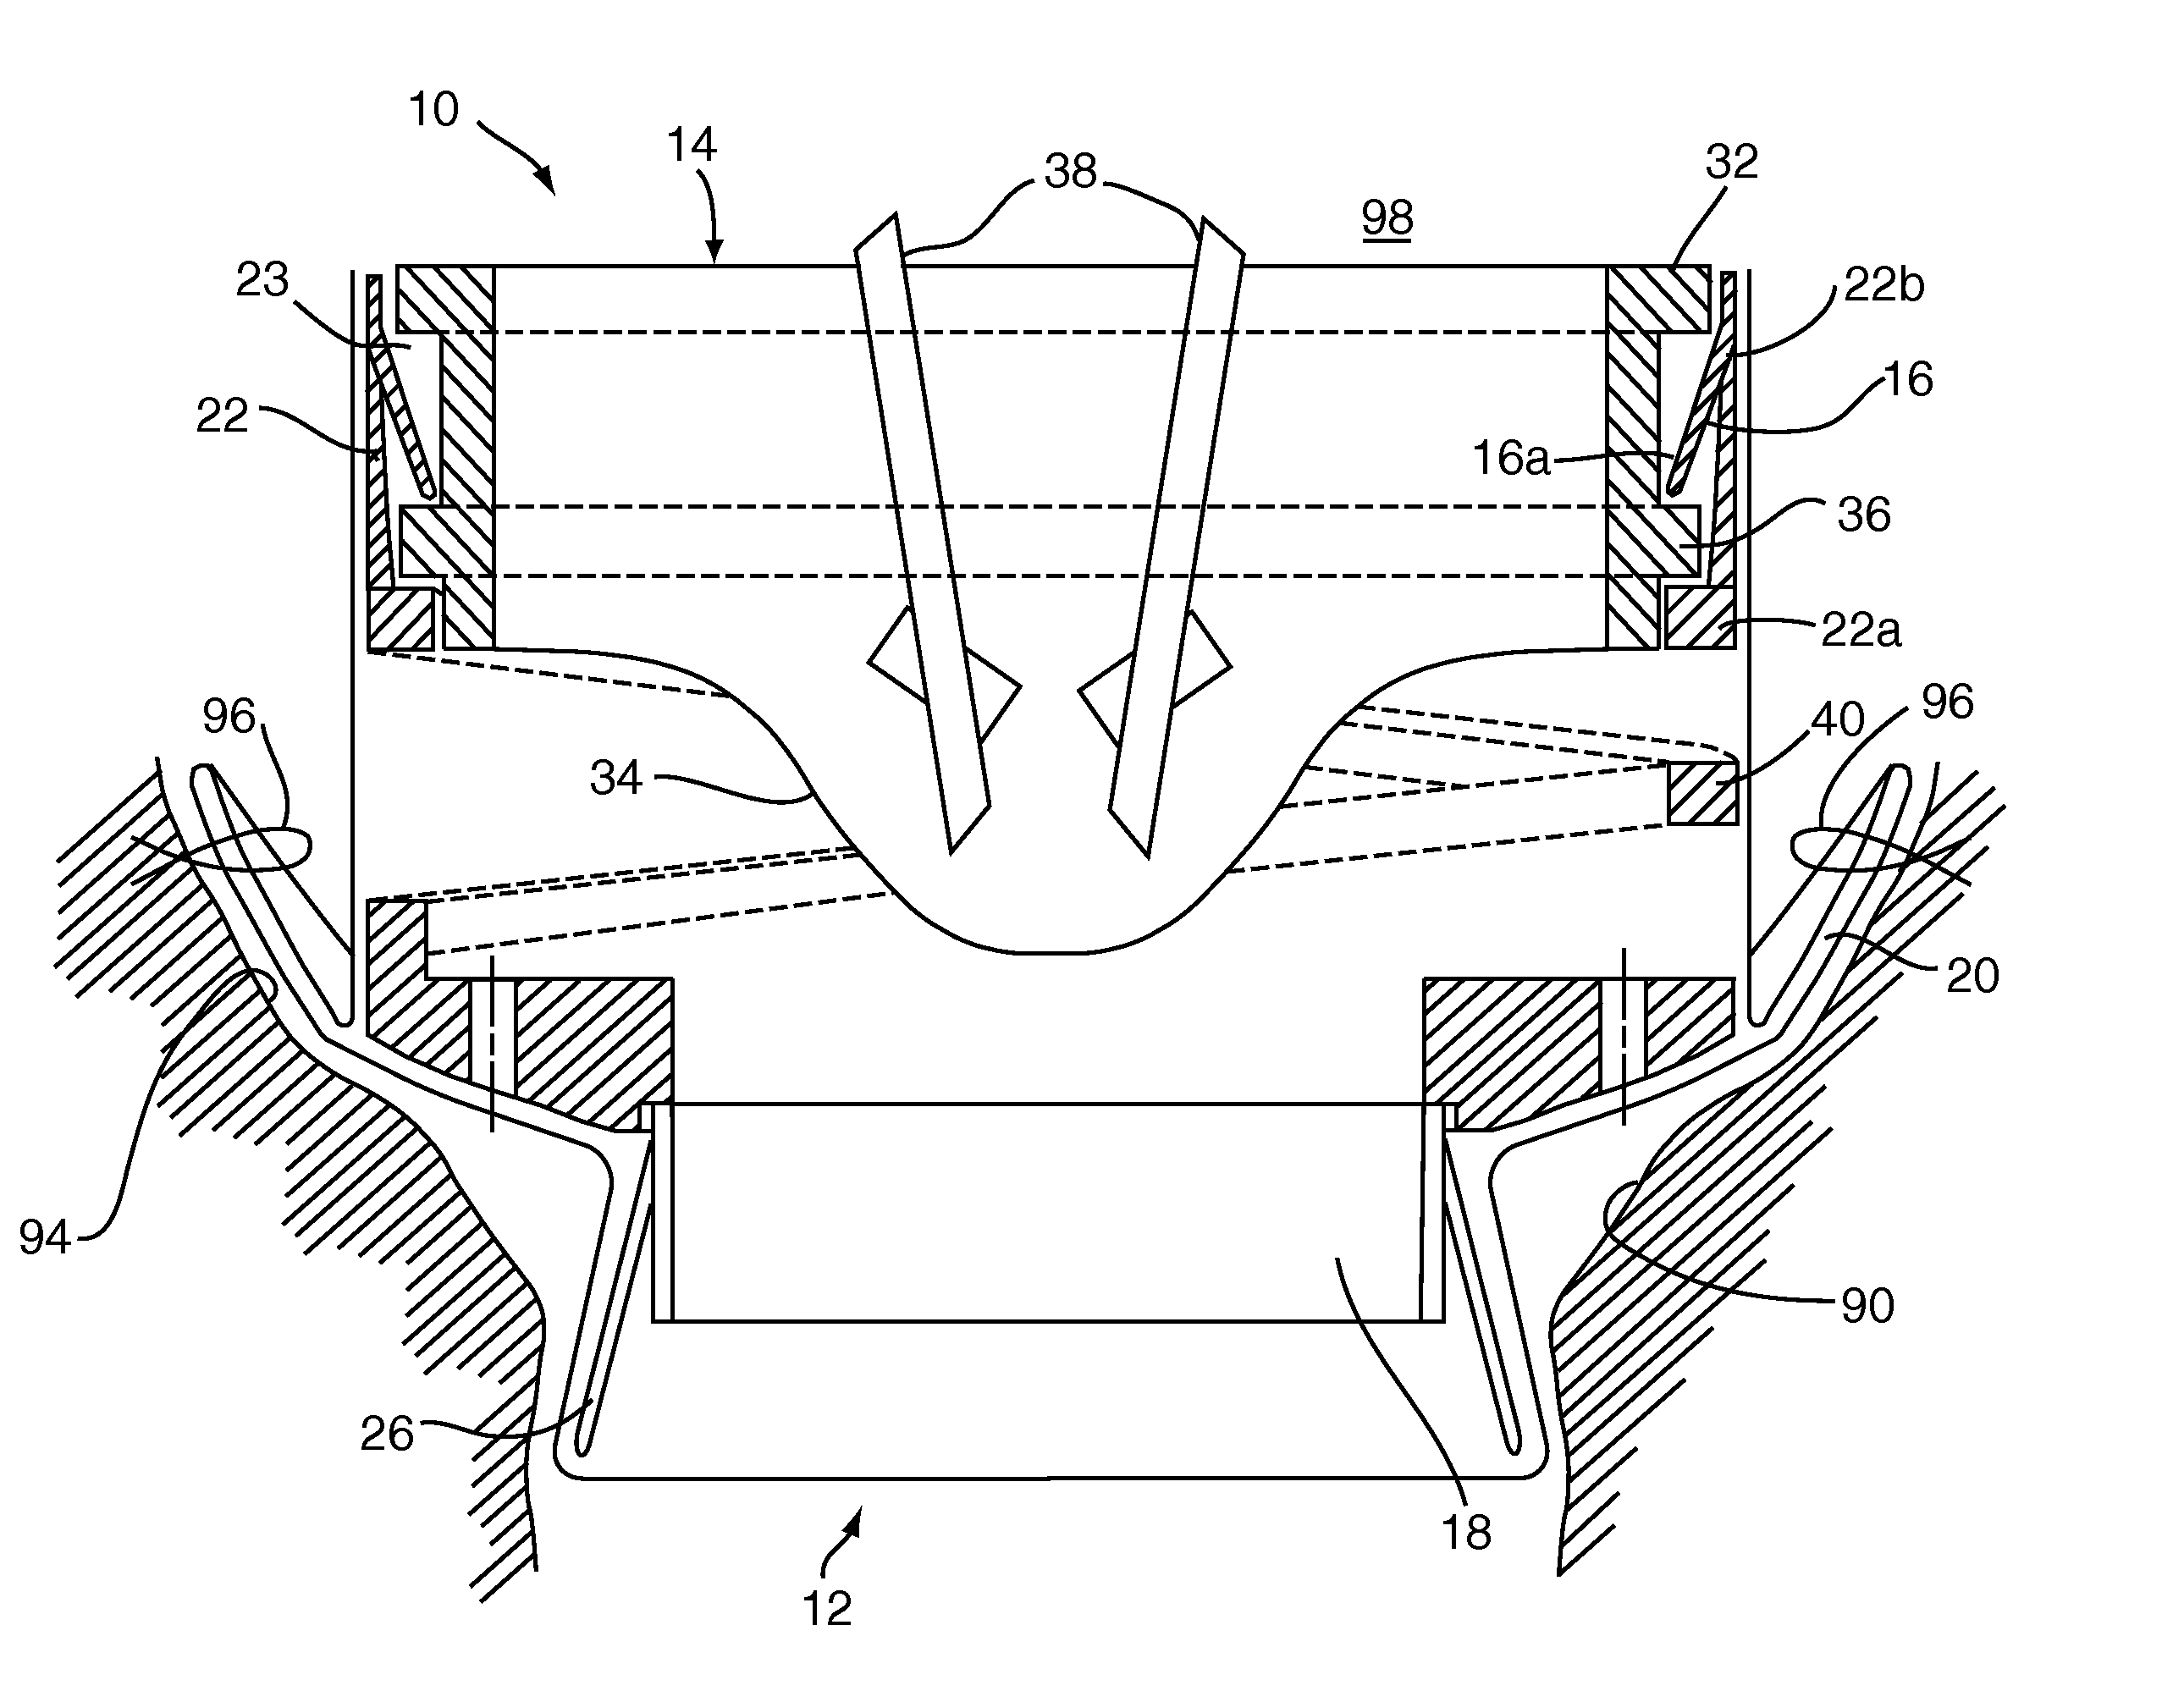 Gasket with spring collar for prosthetic heart valves and methods for making and using them